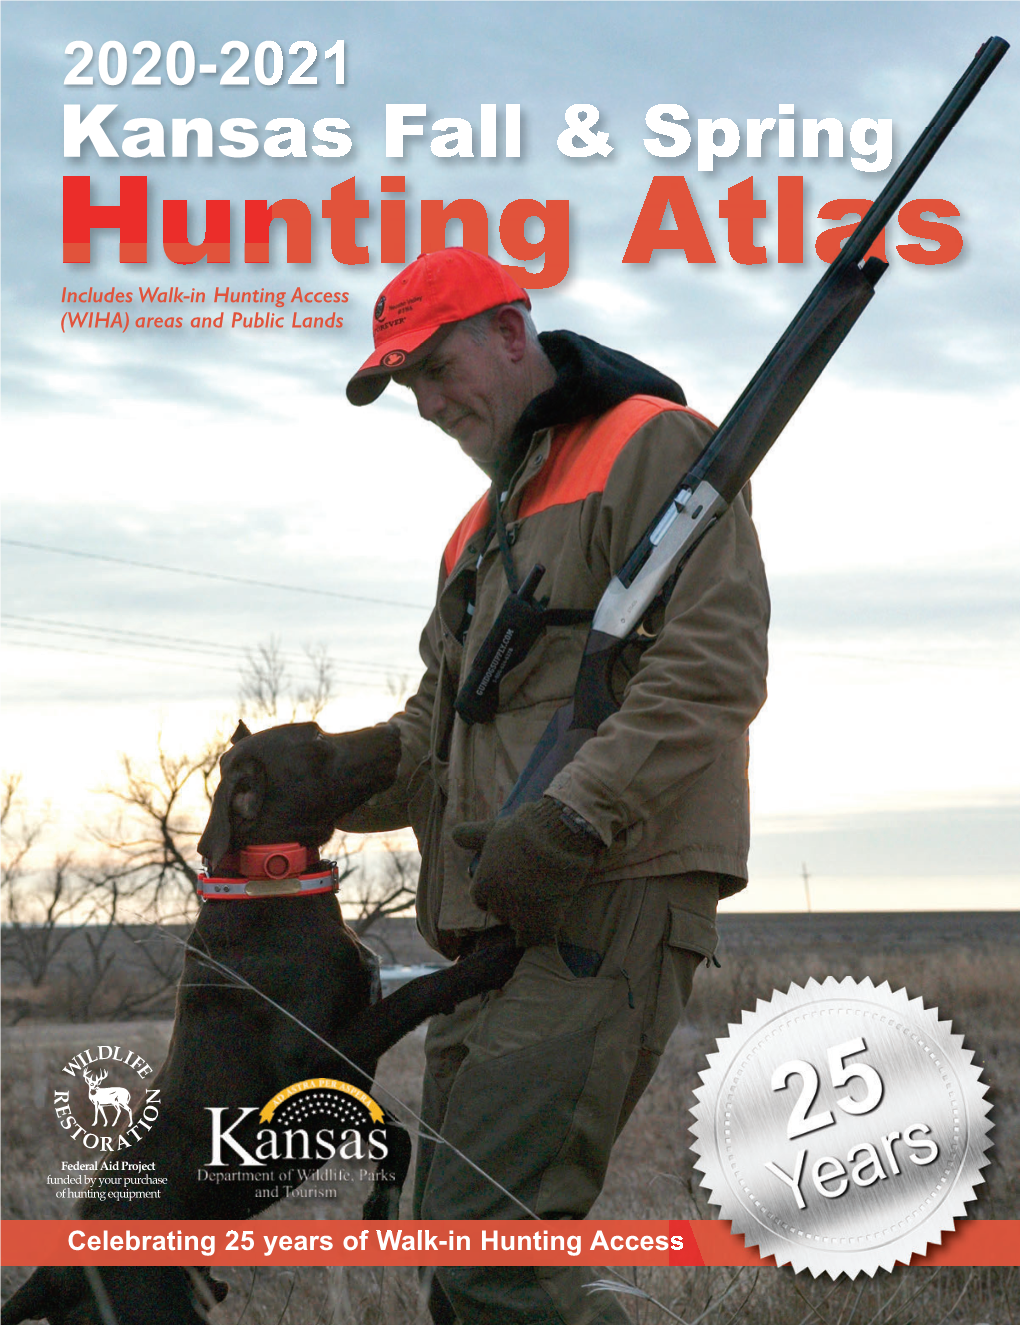 2020-2021 Kansas Fall & Spring Hunting Atlas Includes Walk-In Hunting Access (WIHA) Areas and Public Lands